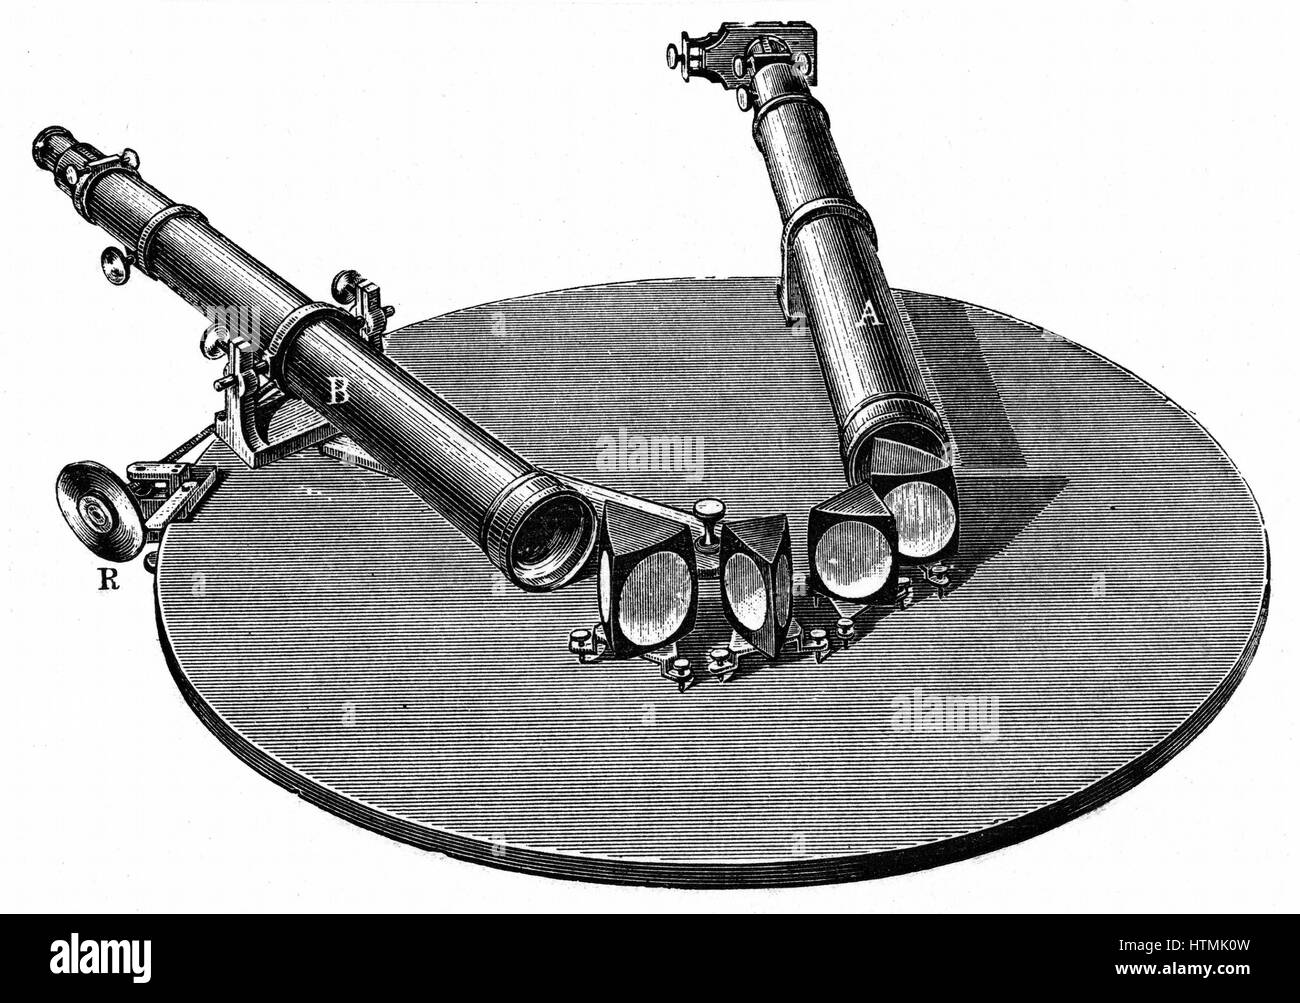 Spectroscope, 1872. Instrument of the type developed by Robert Bunsen (1811-1899) and Robert Kirchhoff (1824-1887) during the 1850s. Their work provided a precise tool to make use of Joseph von Fraunhofer's (1787-1826) observatians of dark lines in the so Stock Photo